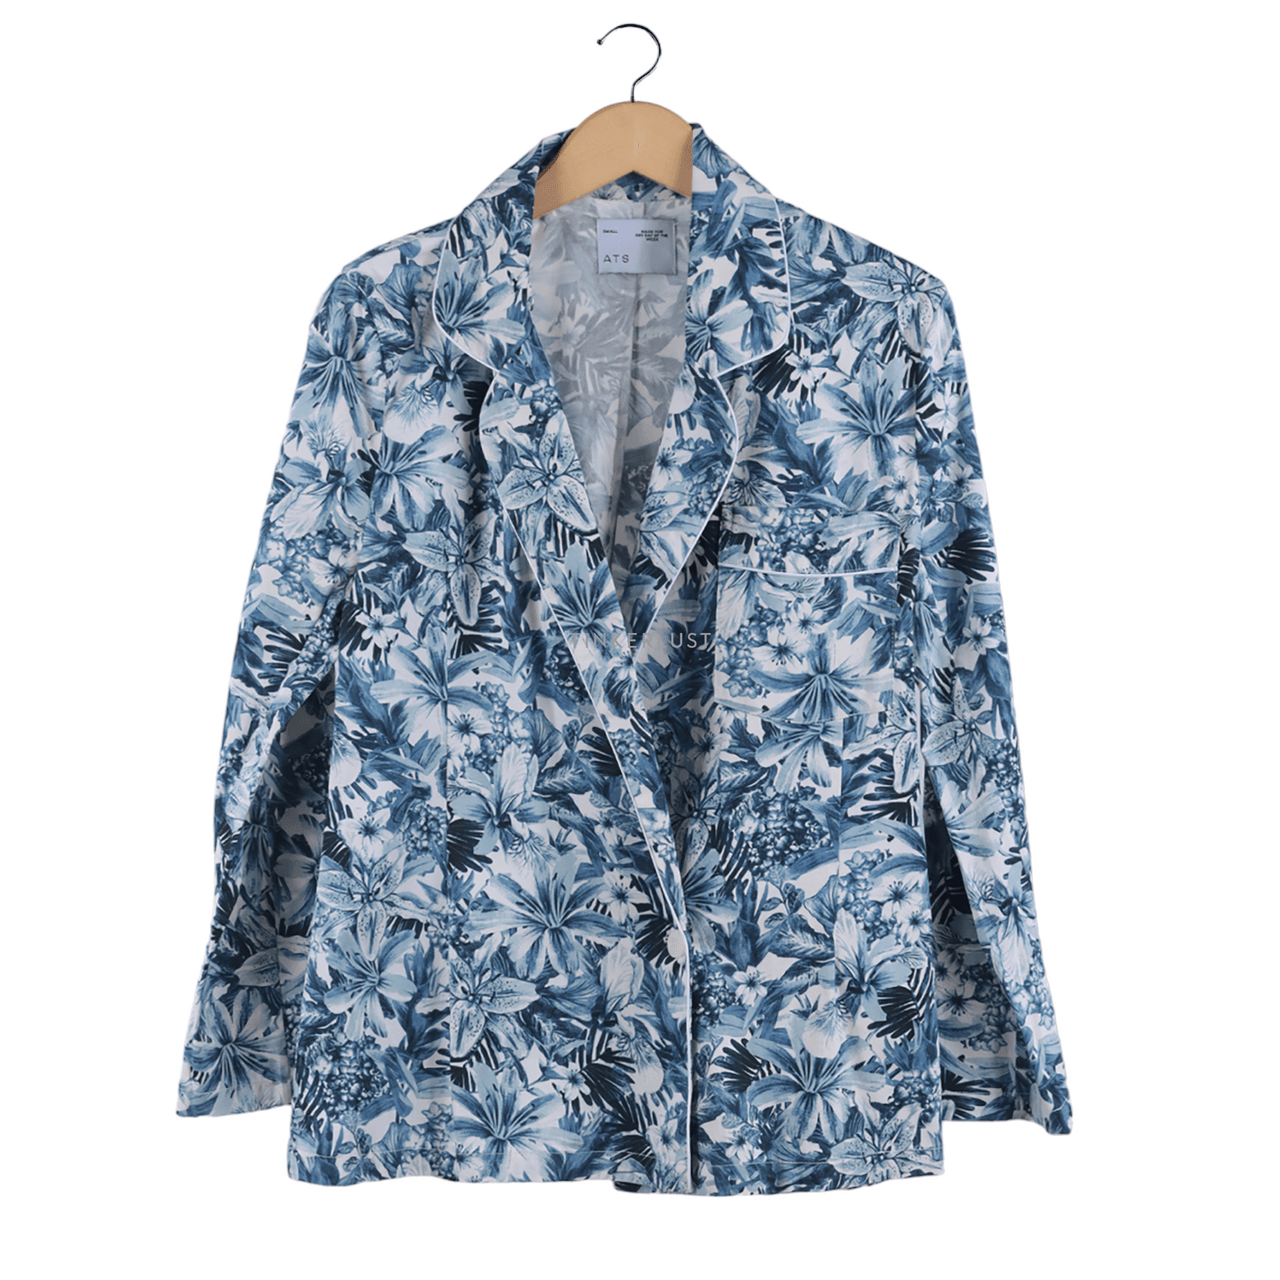 ATS The Label Navy & White Floral Blazer